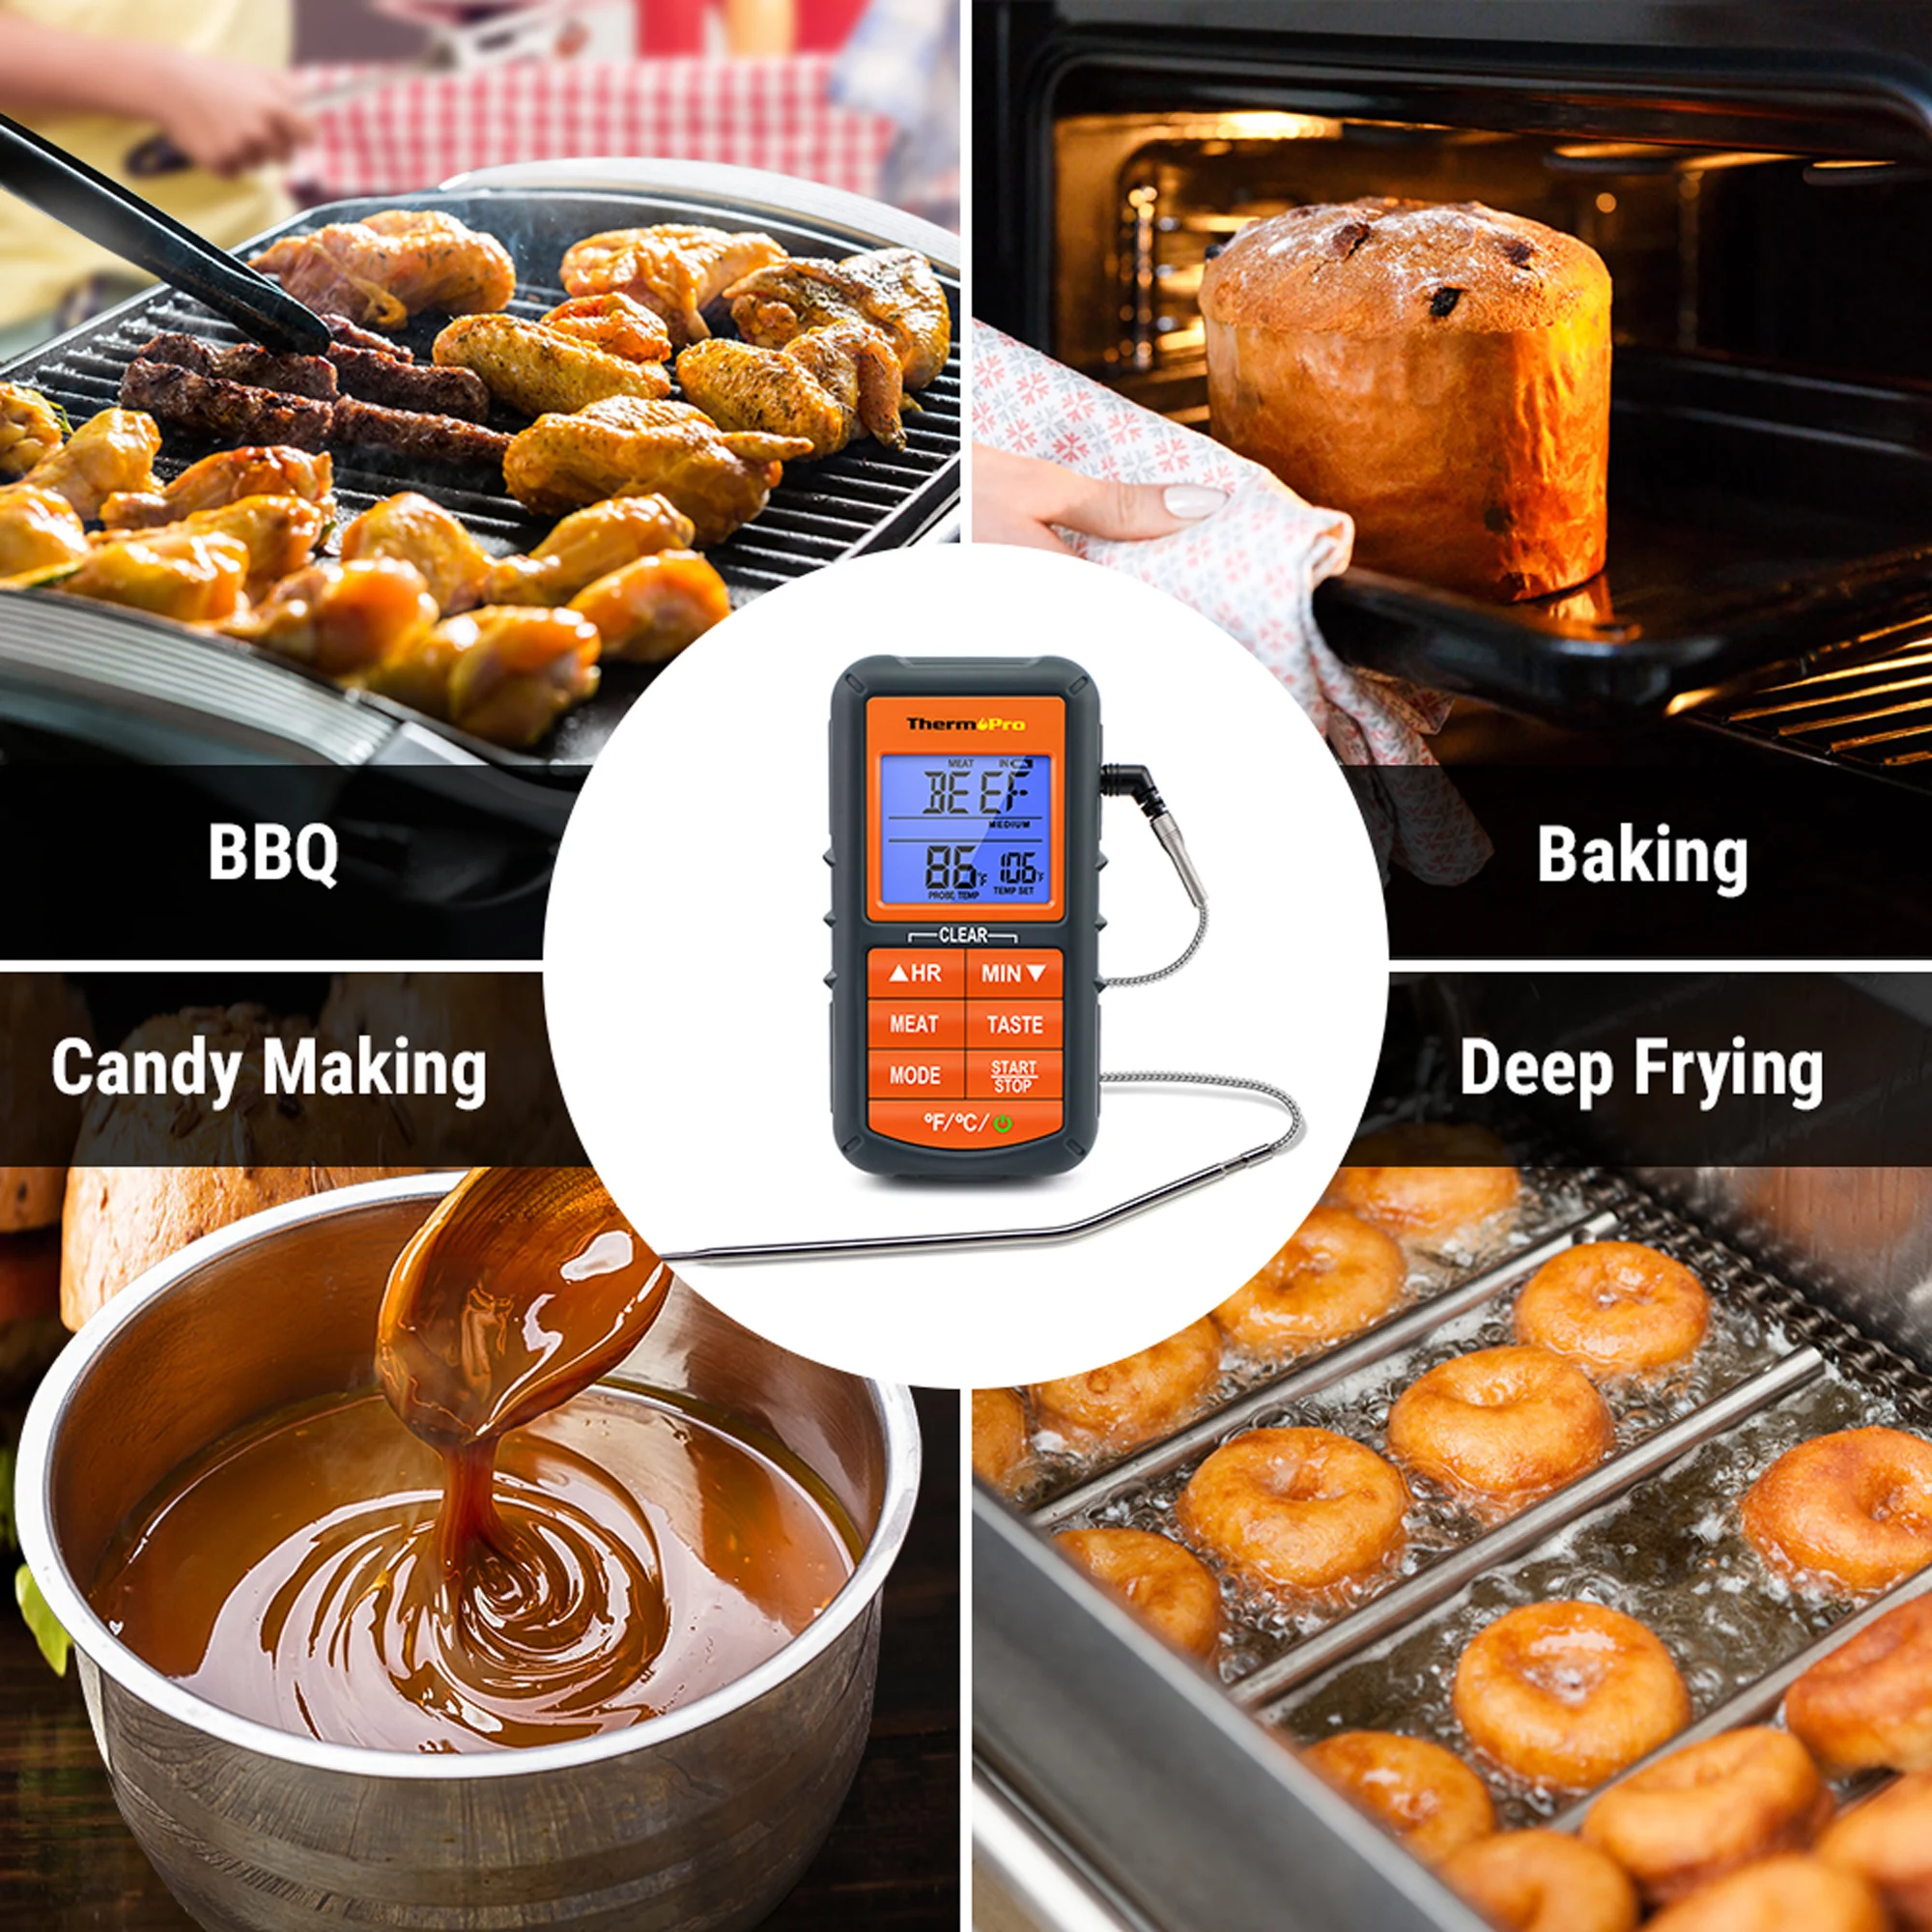 https://ae01.alicdn.com/kf/Hd9a324d9736346a7bdb3d1385298be16M/ThermoPro-TP06B-Digital-Probe-Kitchen-Meat-Food-Candy-Smoker-Oven-BBQ-Cooking-Thermometer-with-Timer.jpg